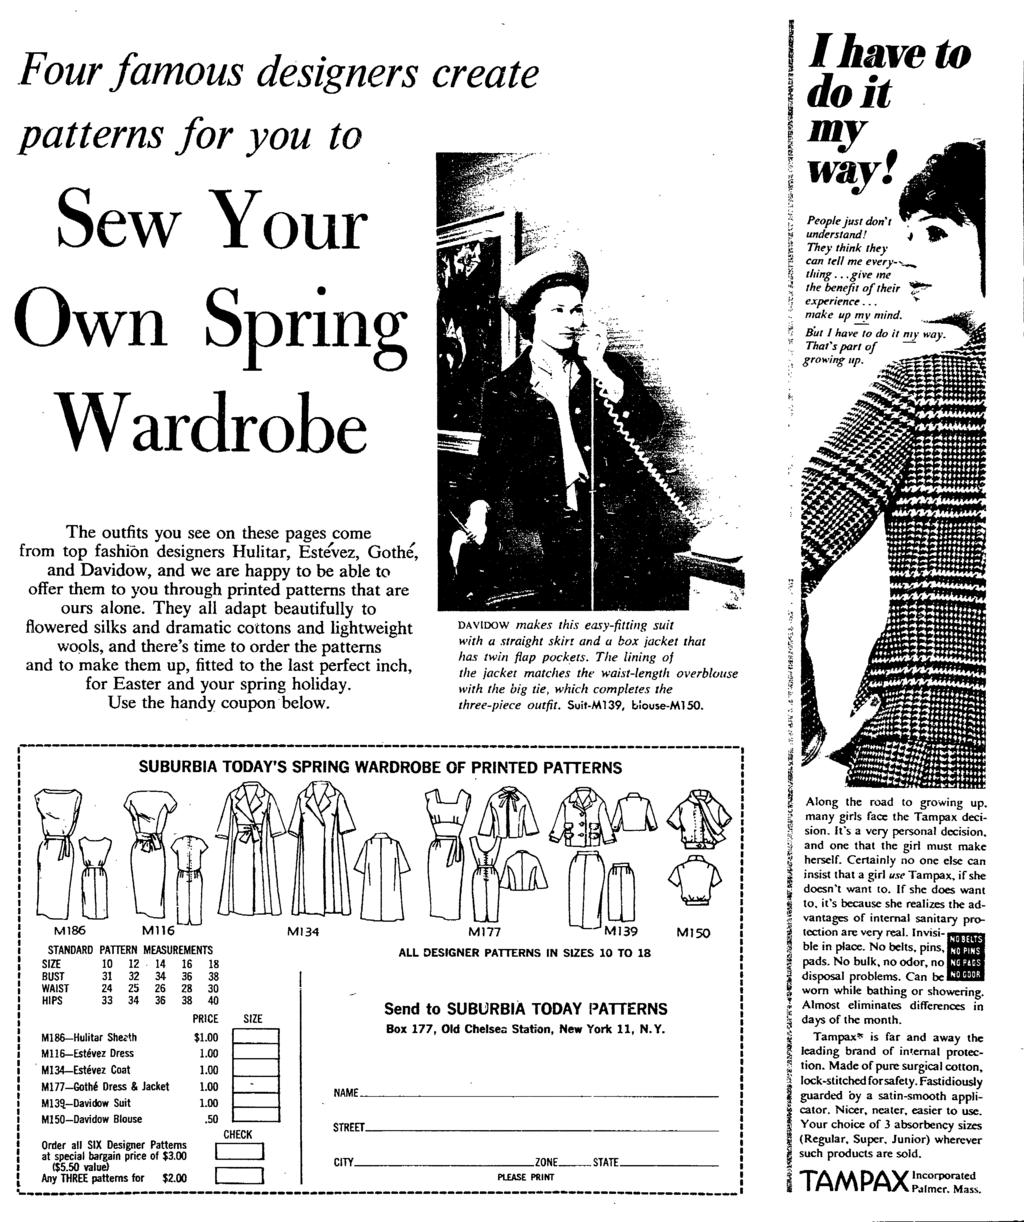 Four famous designers create patterns for you to Sew Your Own Spring lbavew do it imy wav!, " ;': l Peoplejust don't F understand!